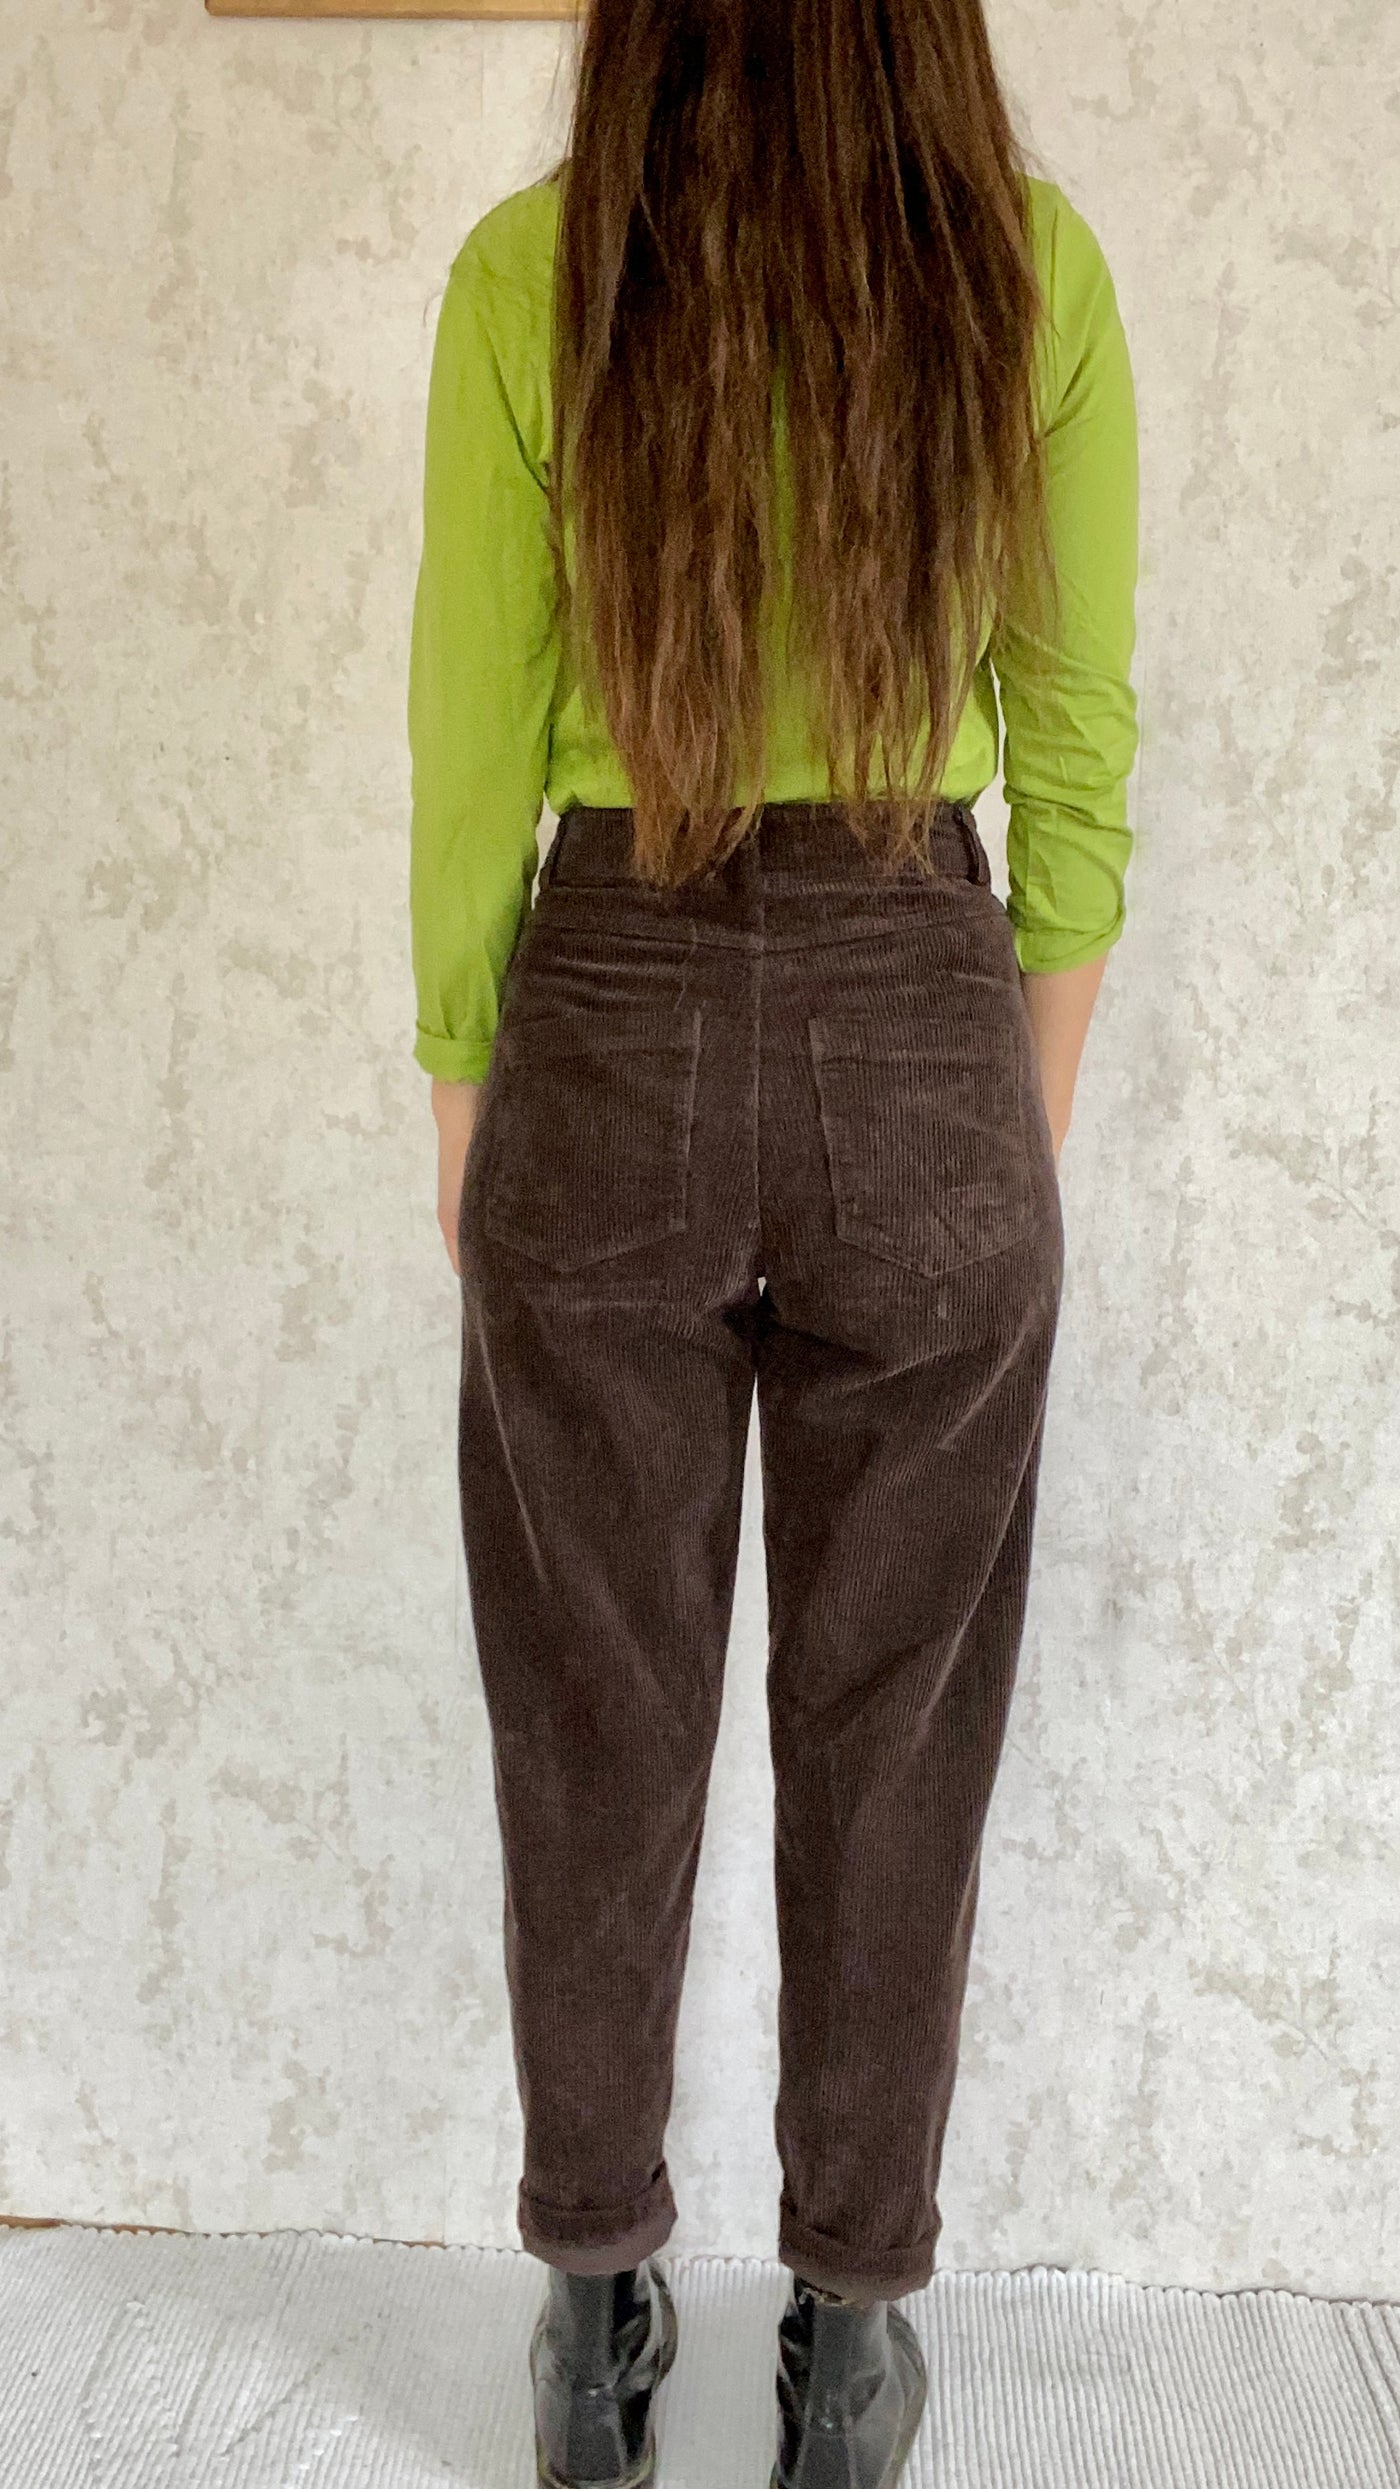 The retro back view of a woman wearing the Cordhose retro 1990 pants made in Italy.